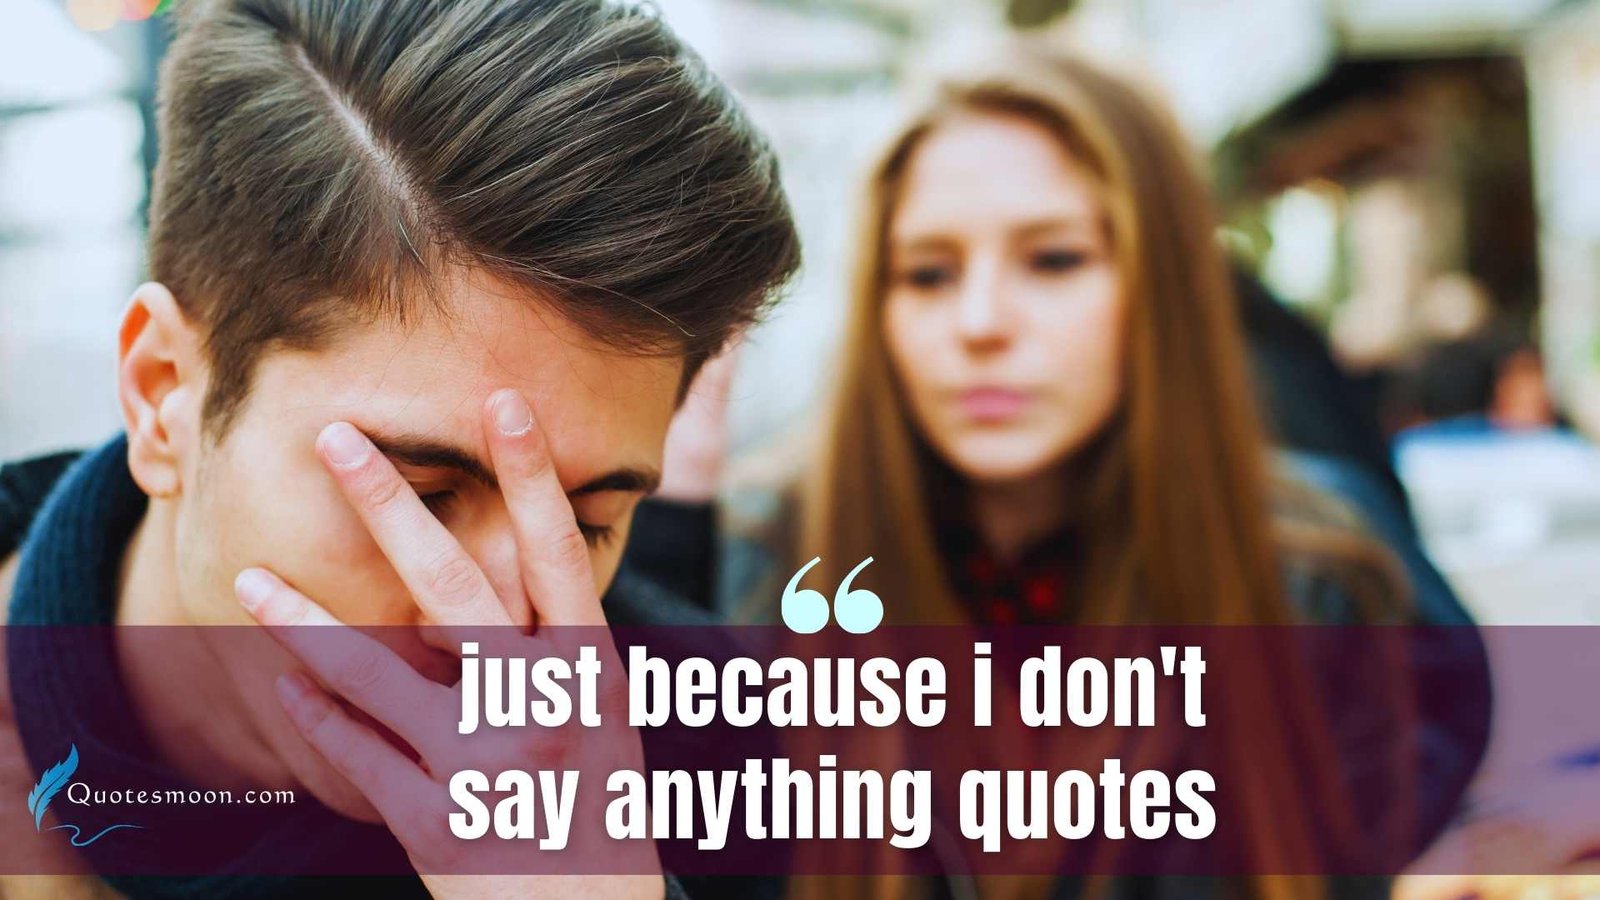 just because i don't say anything quotes